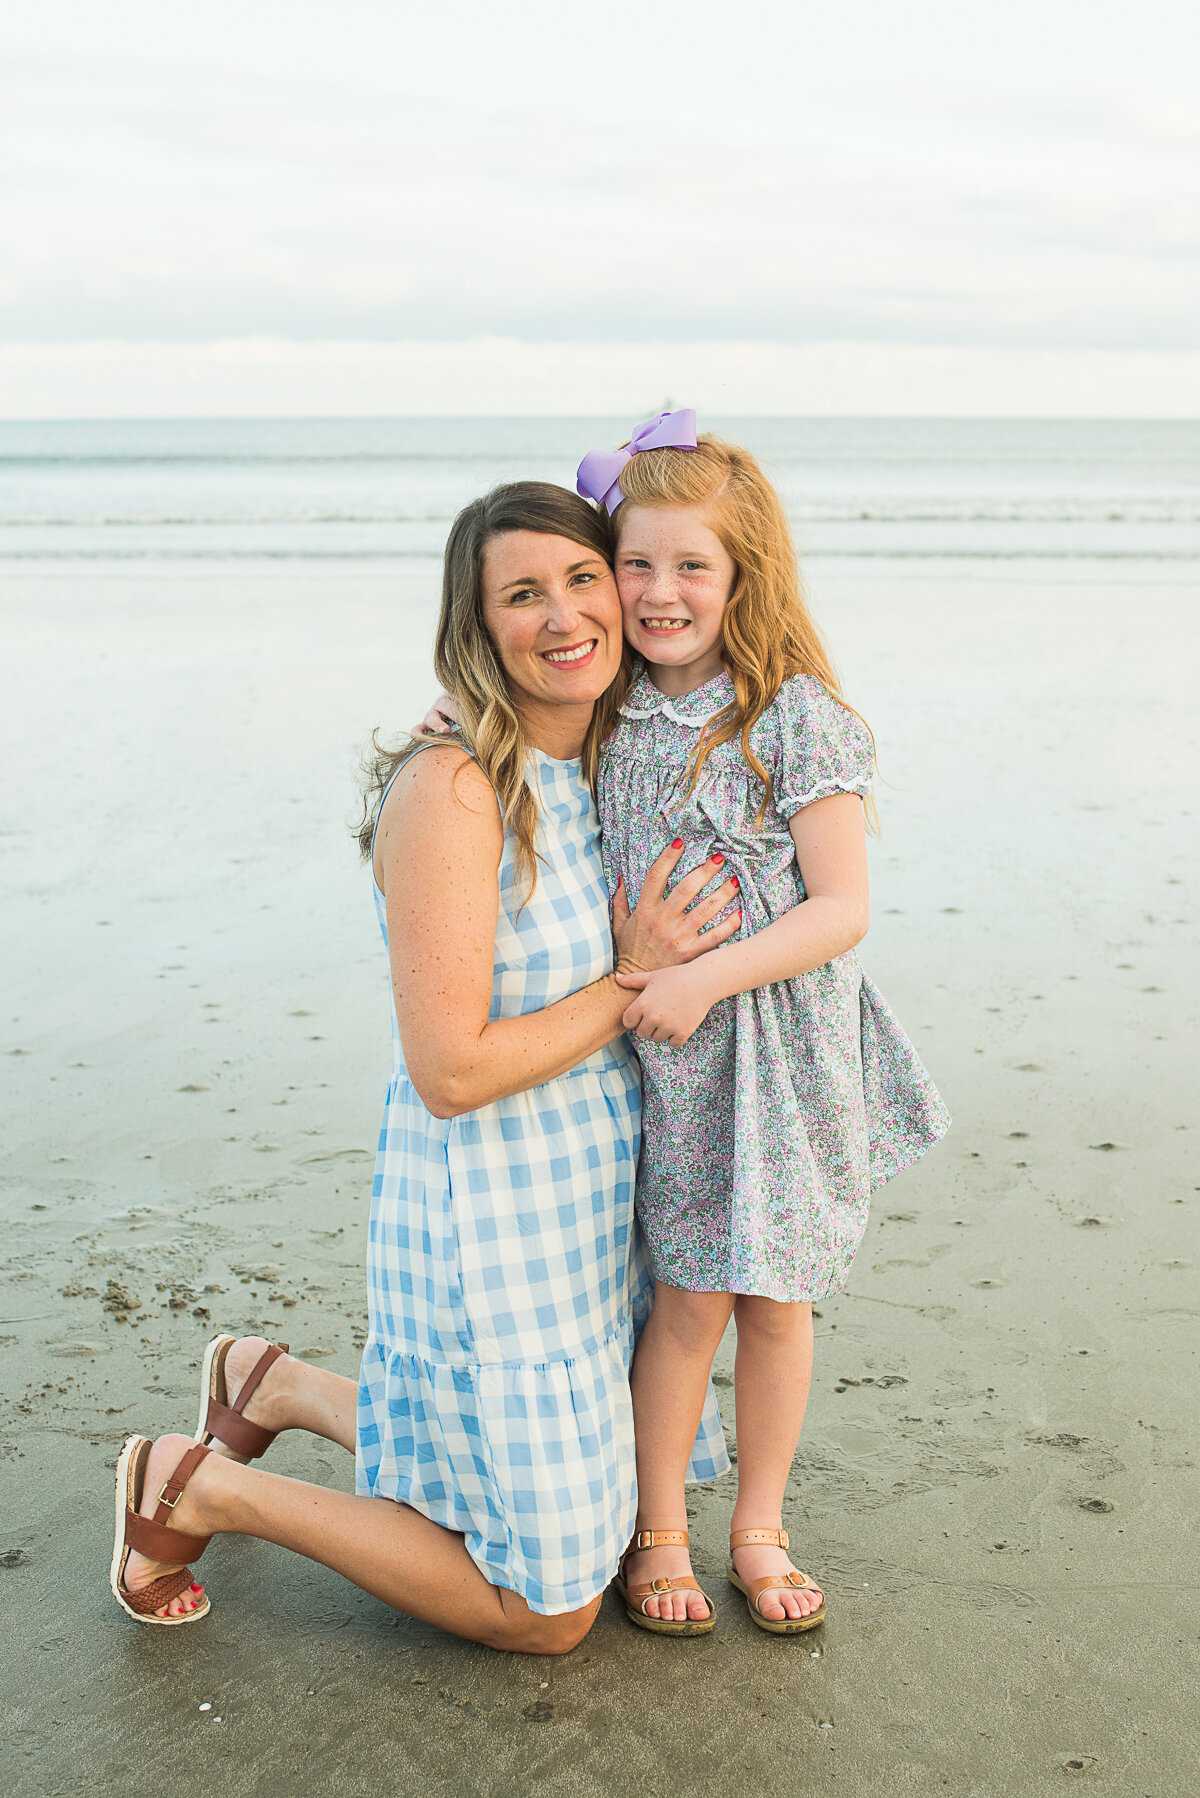  Family portrait by Kiawah Photographer Reese Moore 